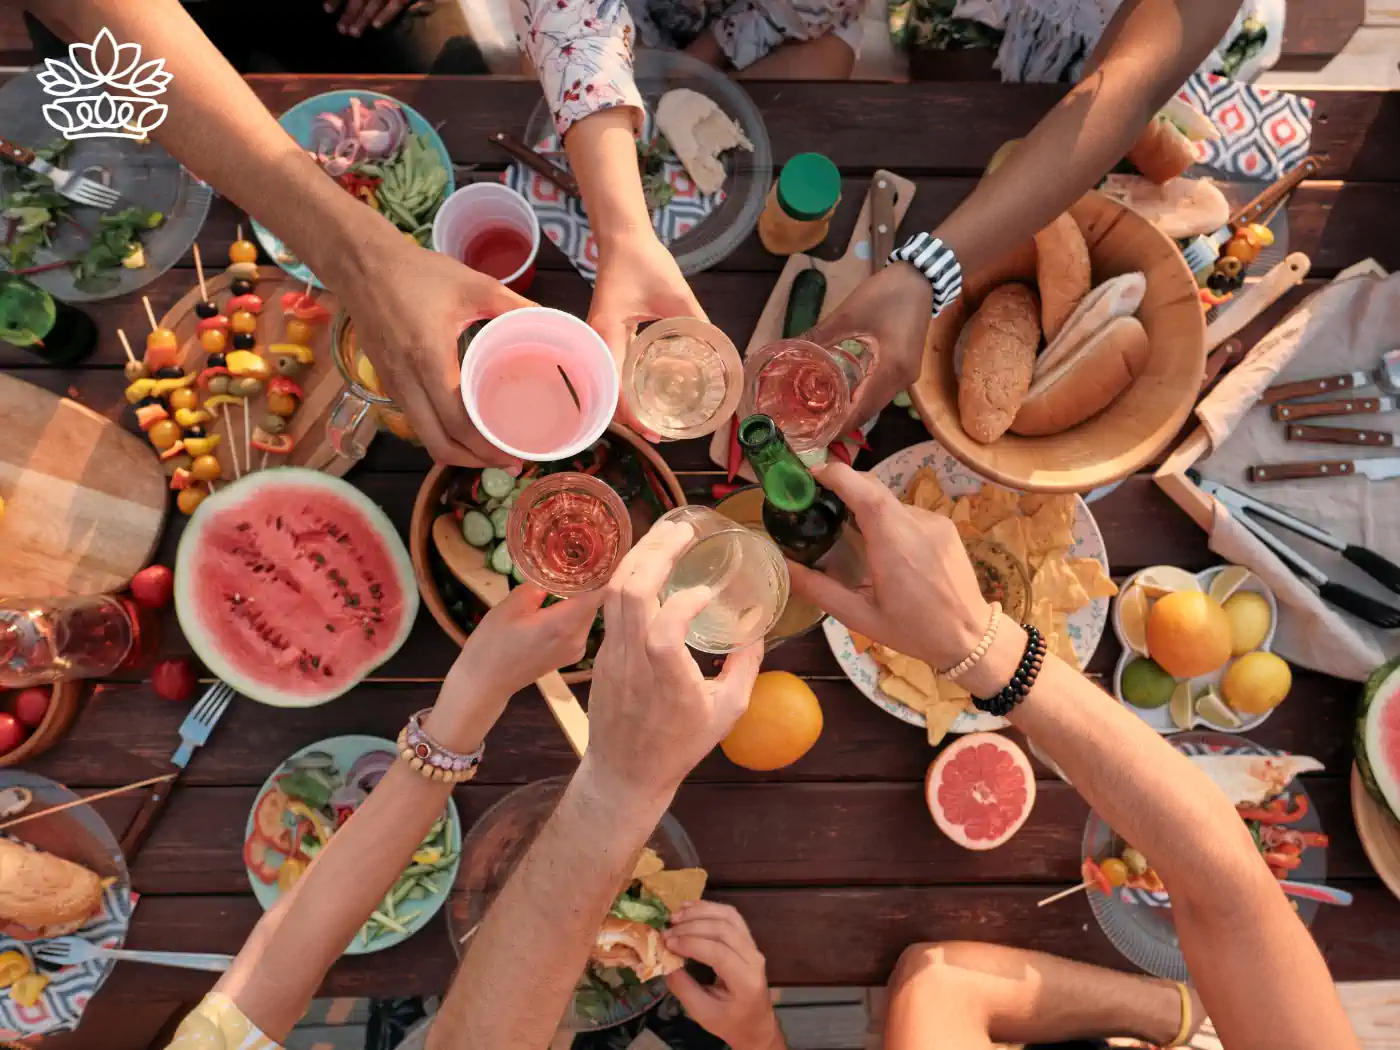 Friends toasting with drinks over a picnic table filled with colourful fruits, salads, and bread. Fabulous Flowers and Gifts - Picnic Gift Baskets Collection.